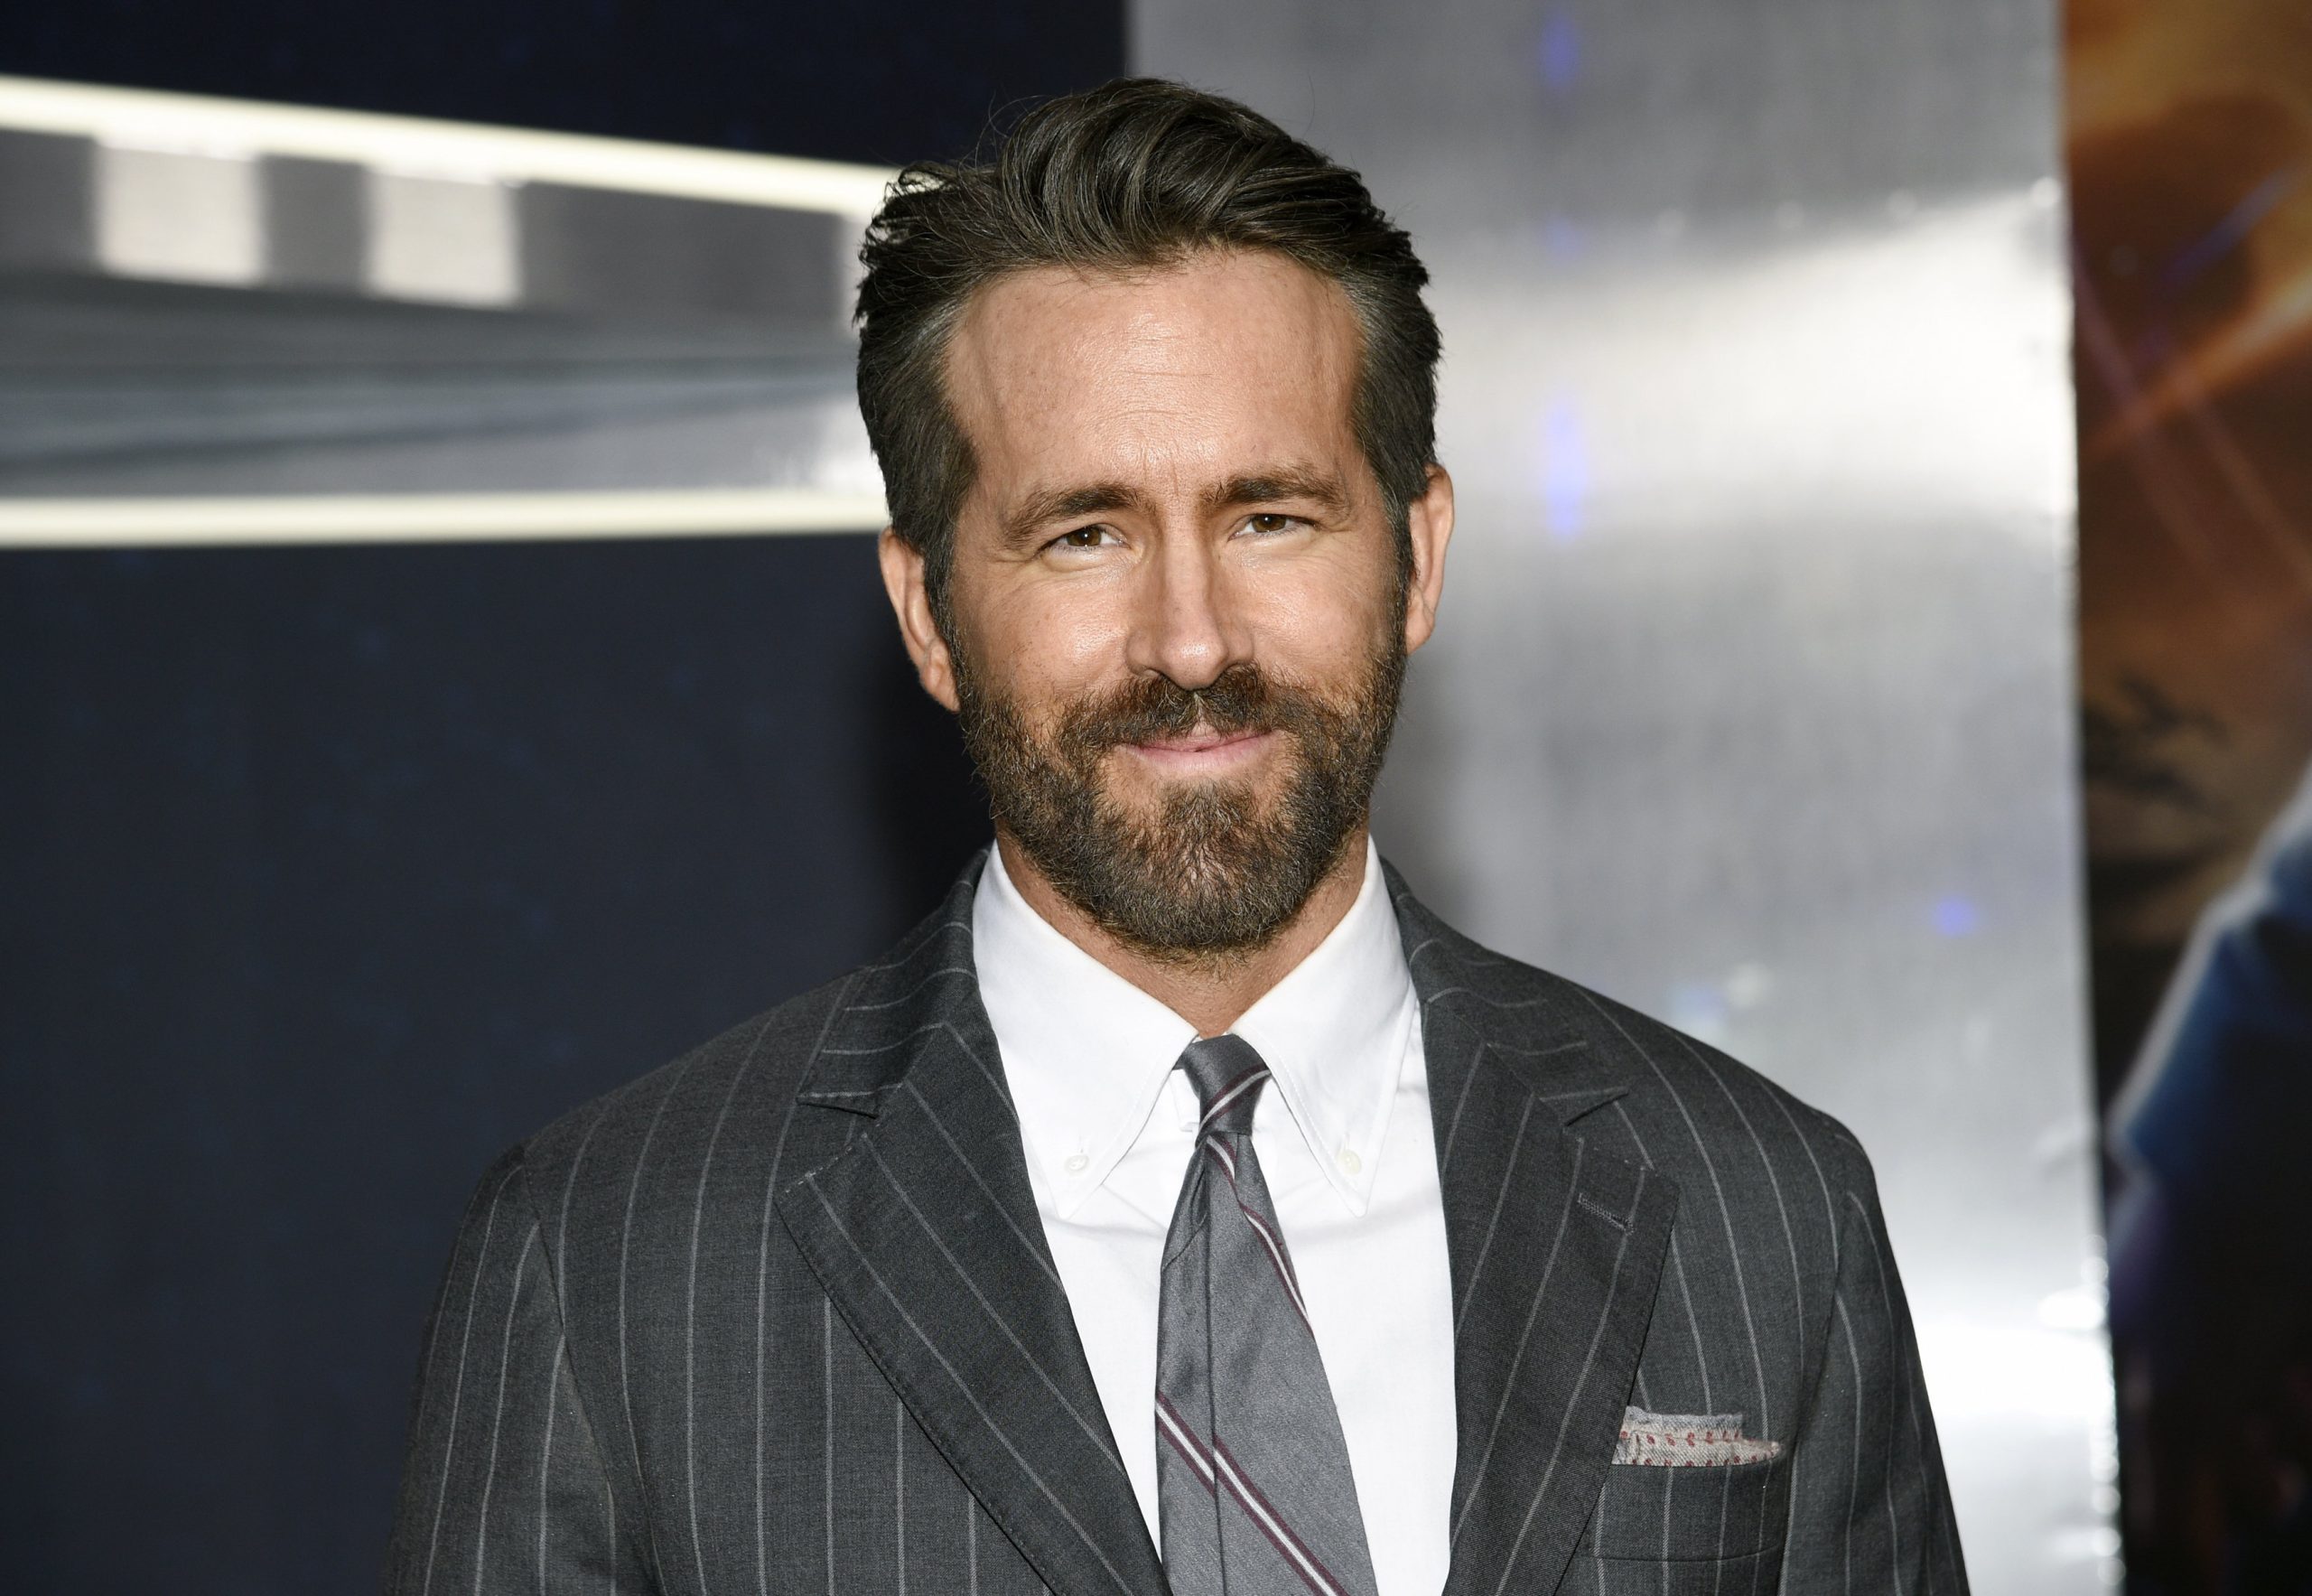 Ryan Reynolds is already in the Netflix Top 10 with his third movie